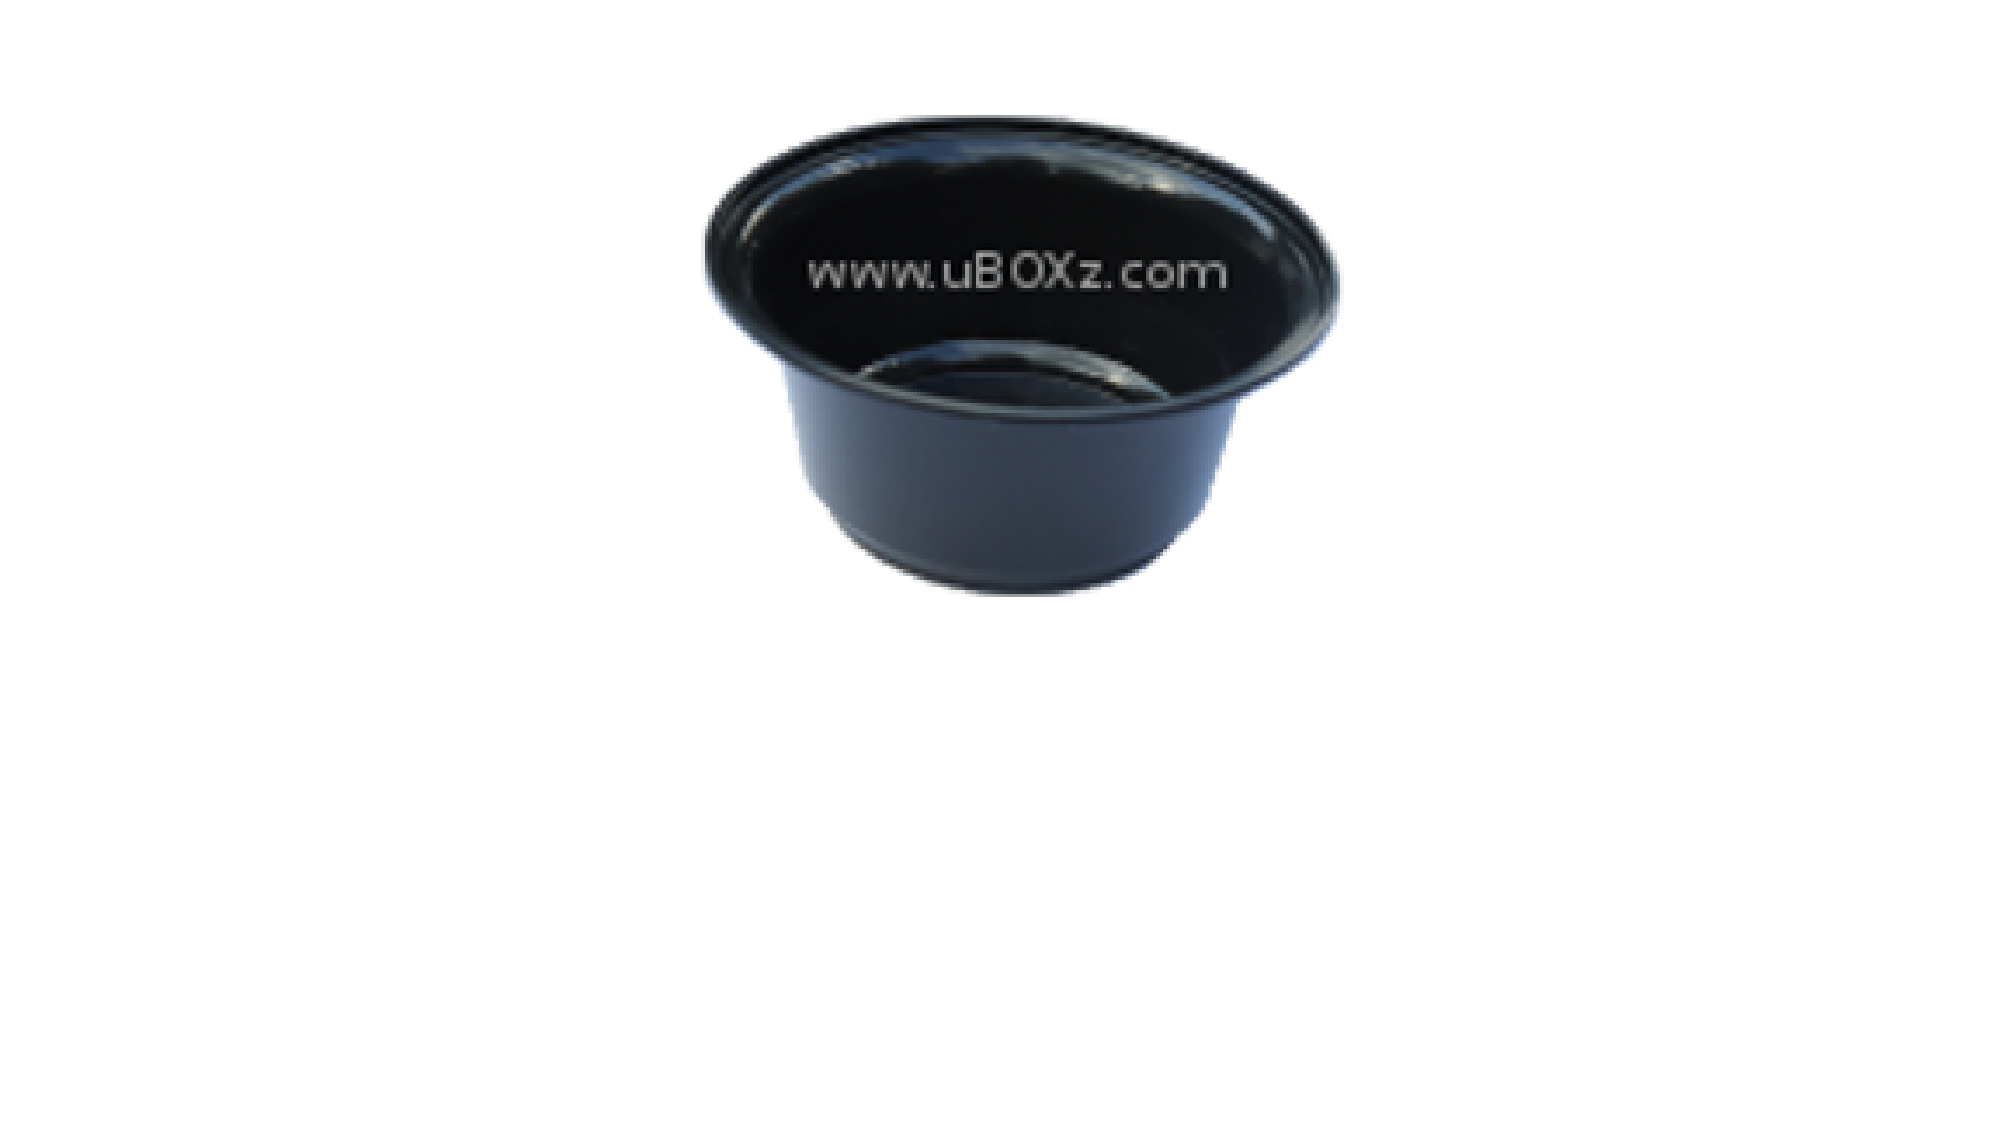 uBOXz food containers TD food containers togo containers manufacturer